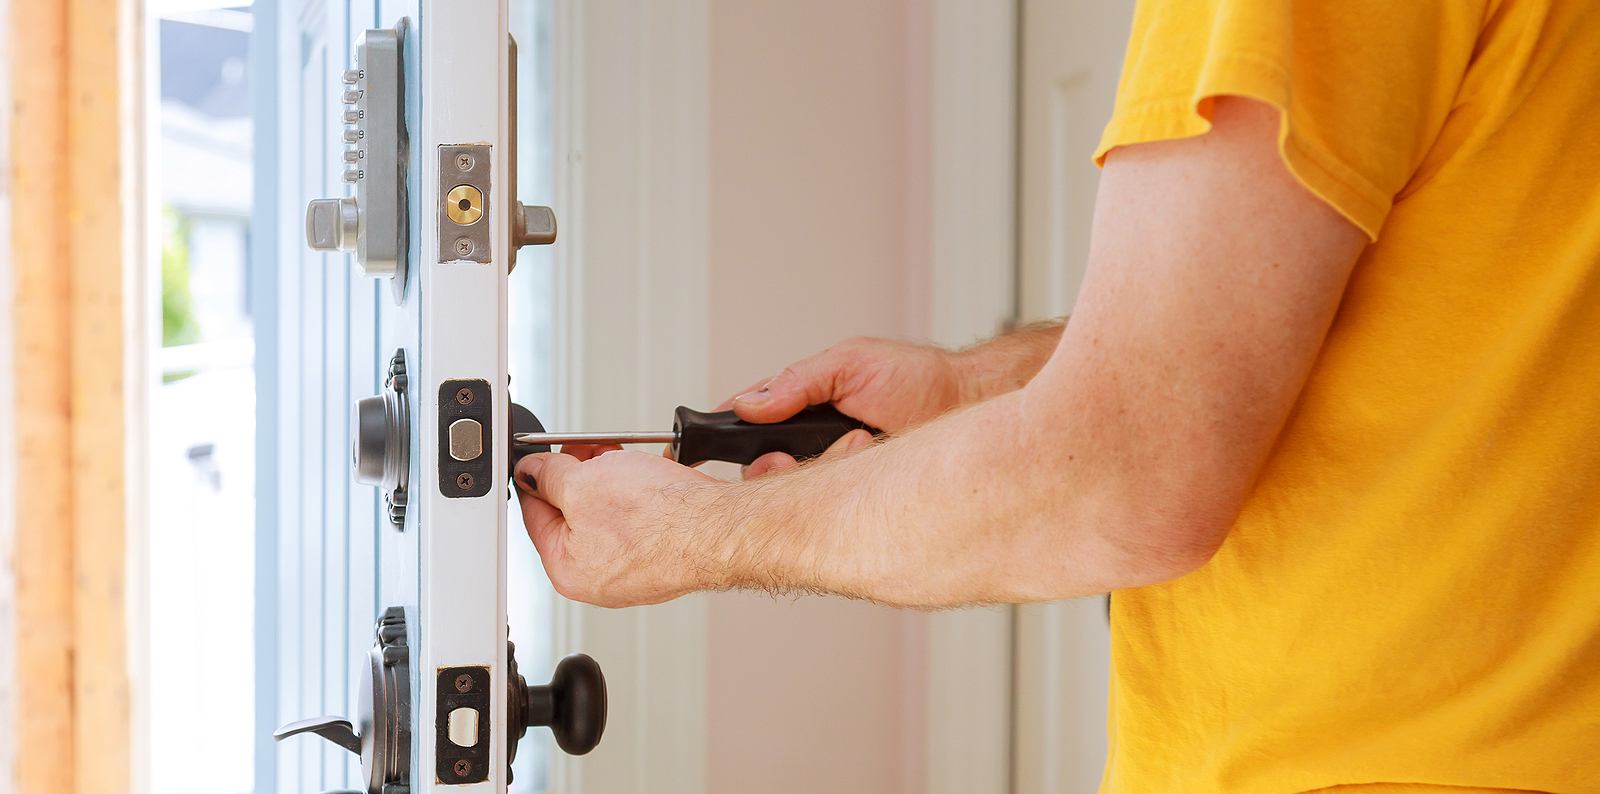 Questions To Ask Before Replacing a Deadbolt